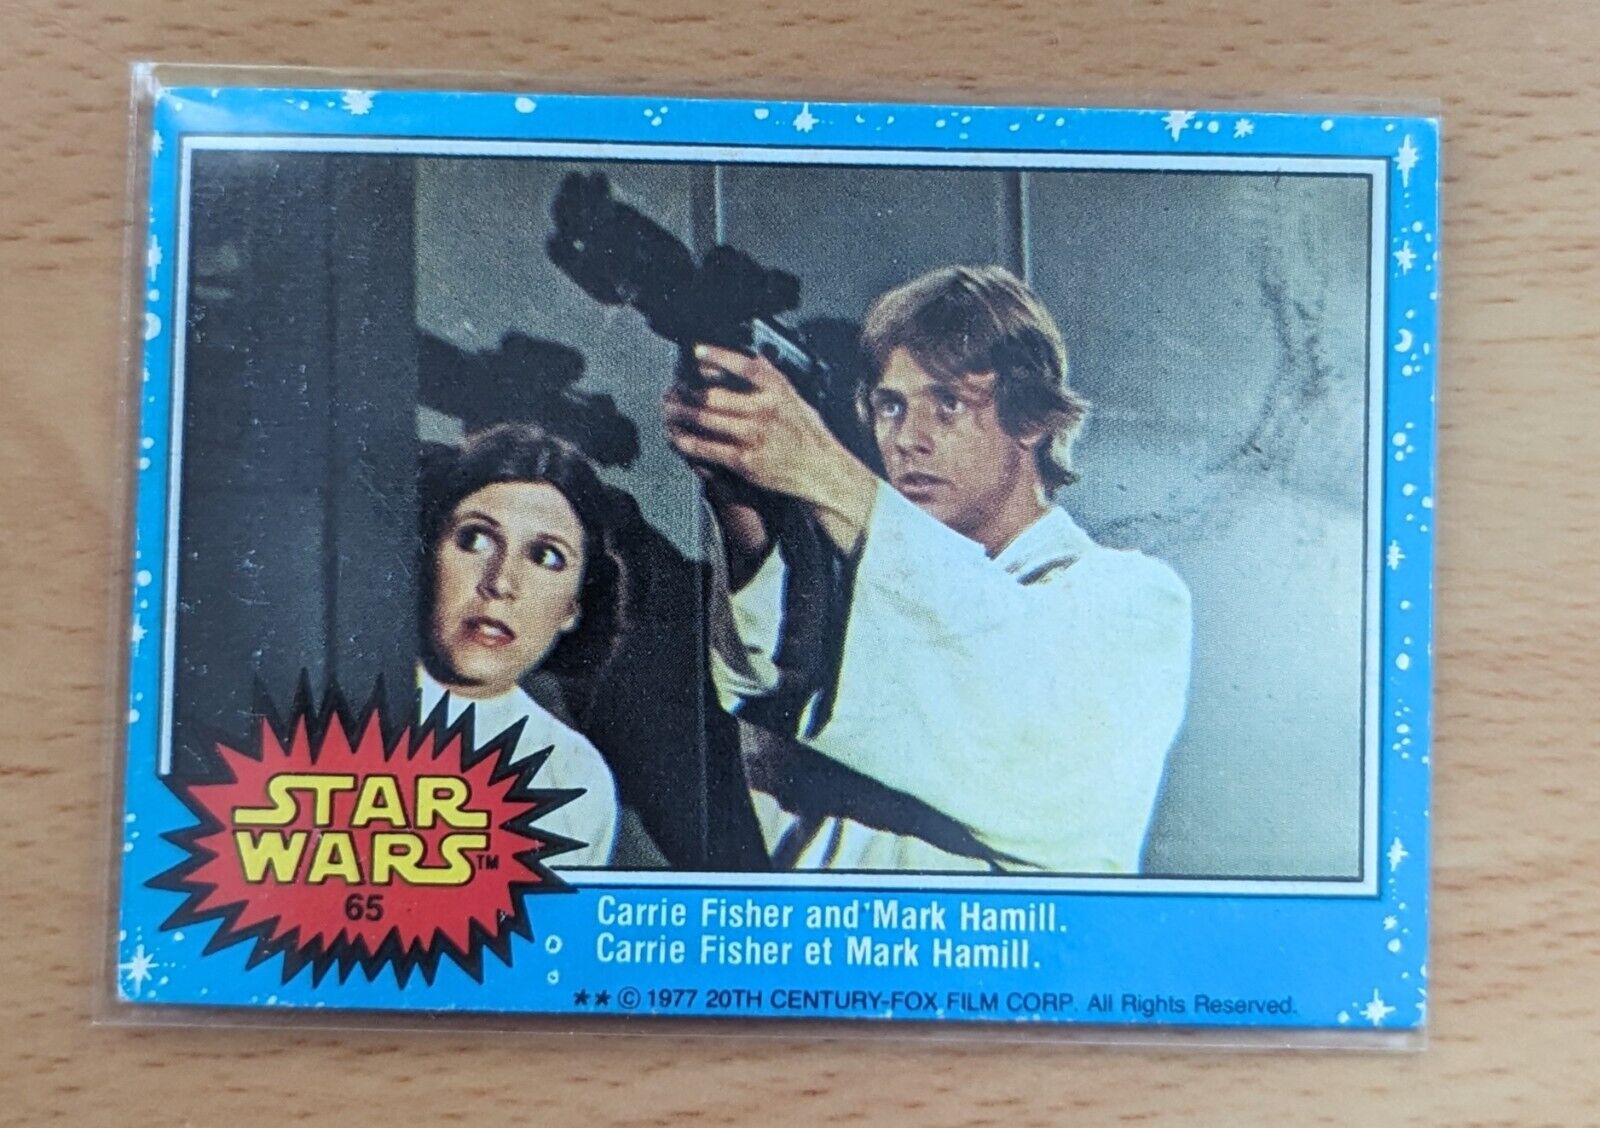 1977 Topps Star Wars Series I Blue Card #65 Carrie Fisher & Mark Hamill Vintage